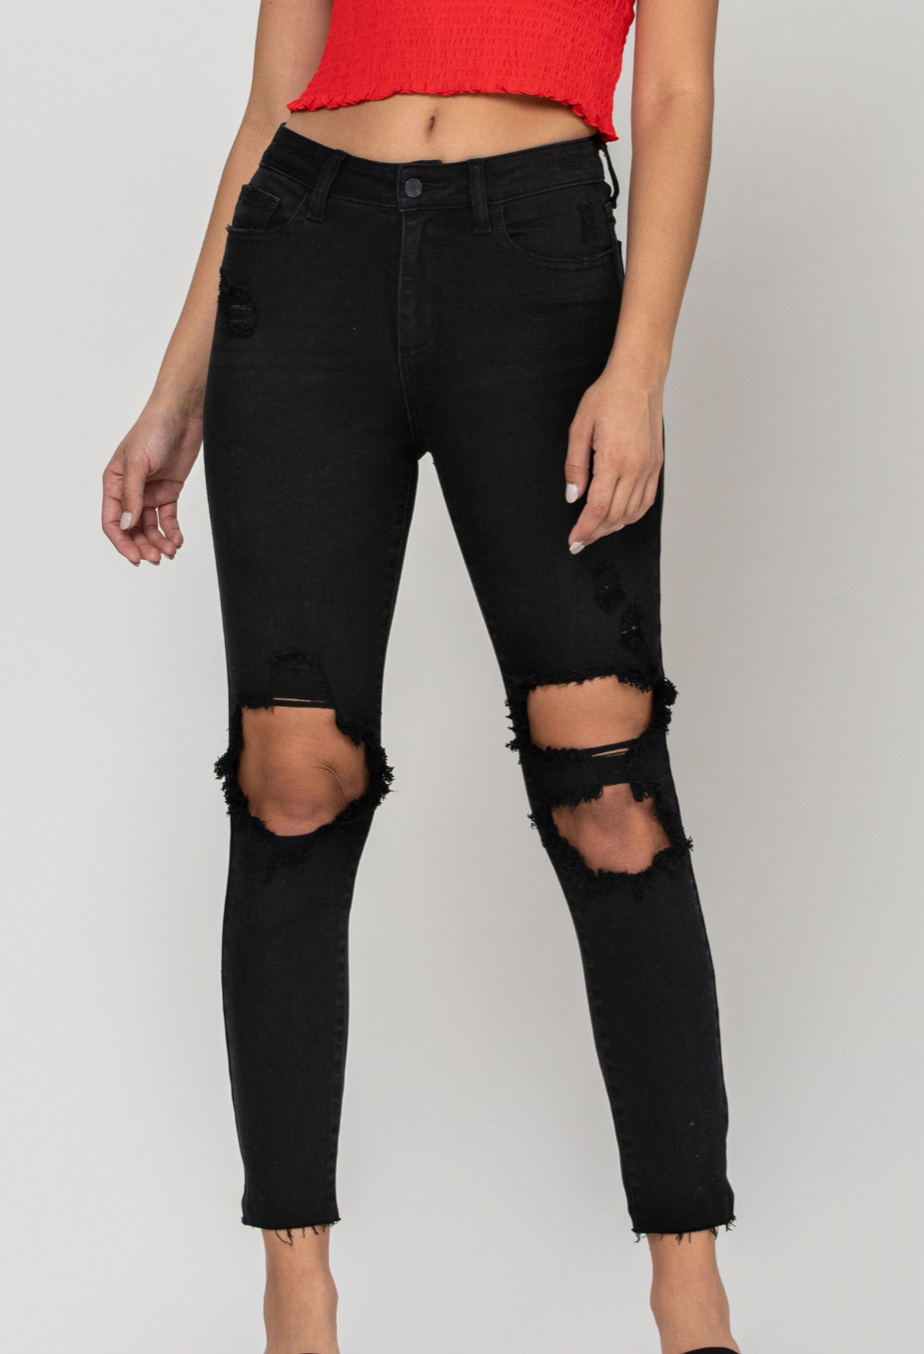 Fitted through the hip and more relaxed through the thigh & knee, our mom skinny jean offers a fit that’s as flattering as it is comfortable. Inspired by the 90s, this jet black wash style with big cutouts along with frayed hem detail gives your look an authentic, vintage vibe.   Inseam: 27"  Rise: 11"